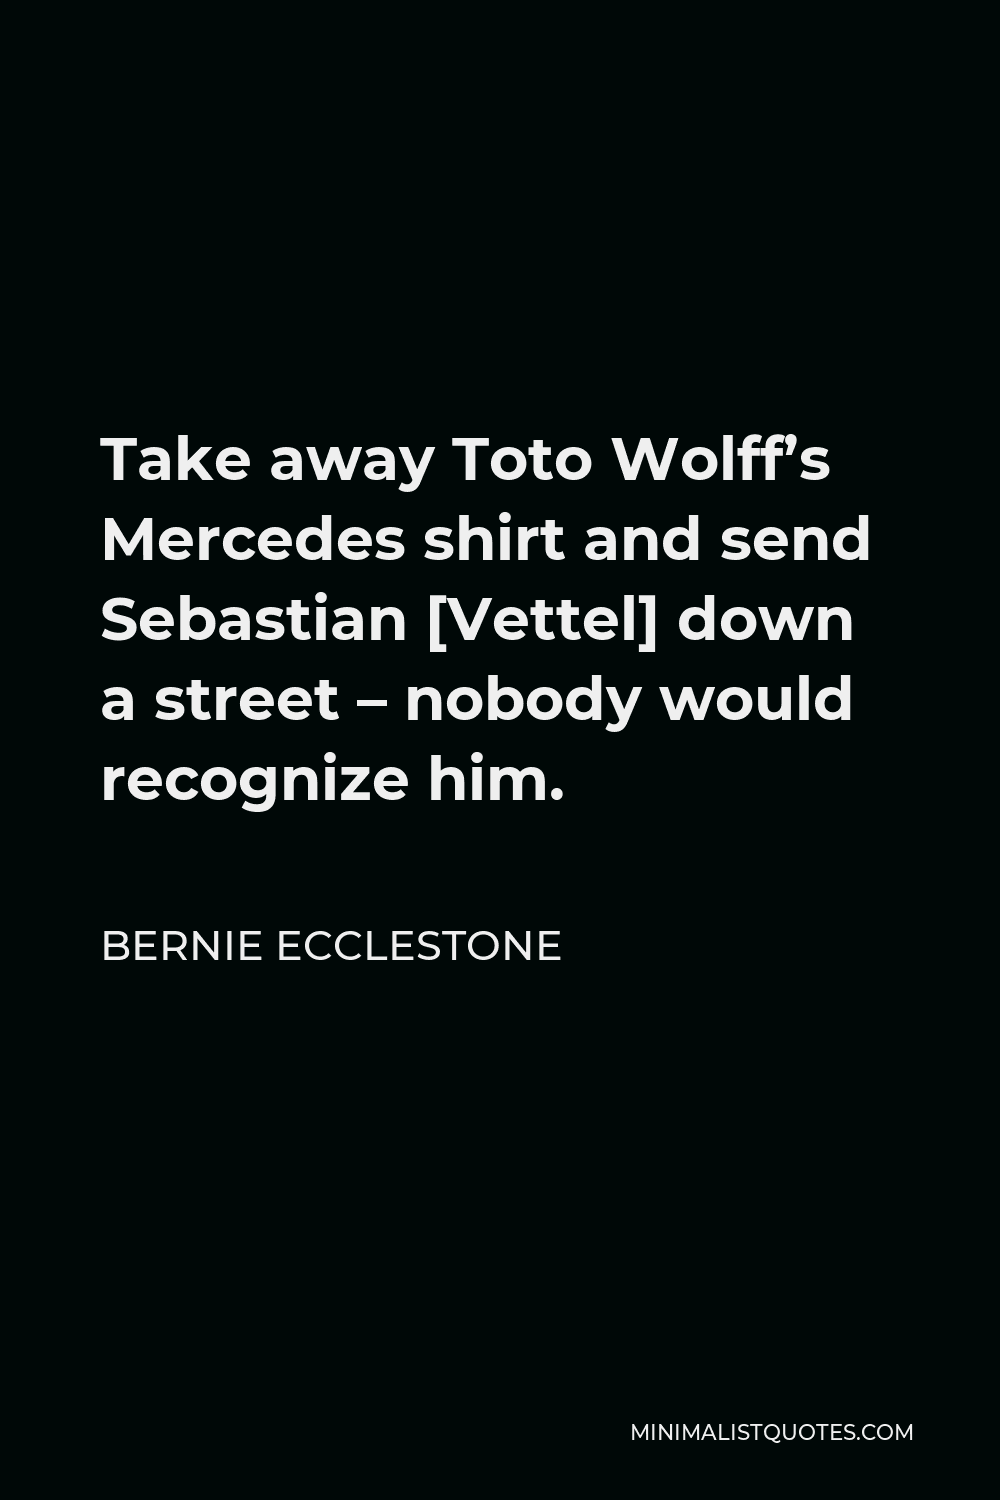 Bernie Ecclestone Quote - Take away Toto Wolff’s Mercedes shirt and send Sebastian [Vettel] down a street – nobody would recognize him.